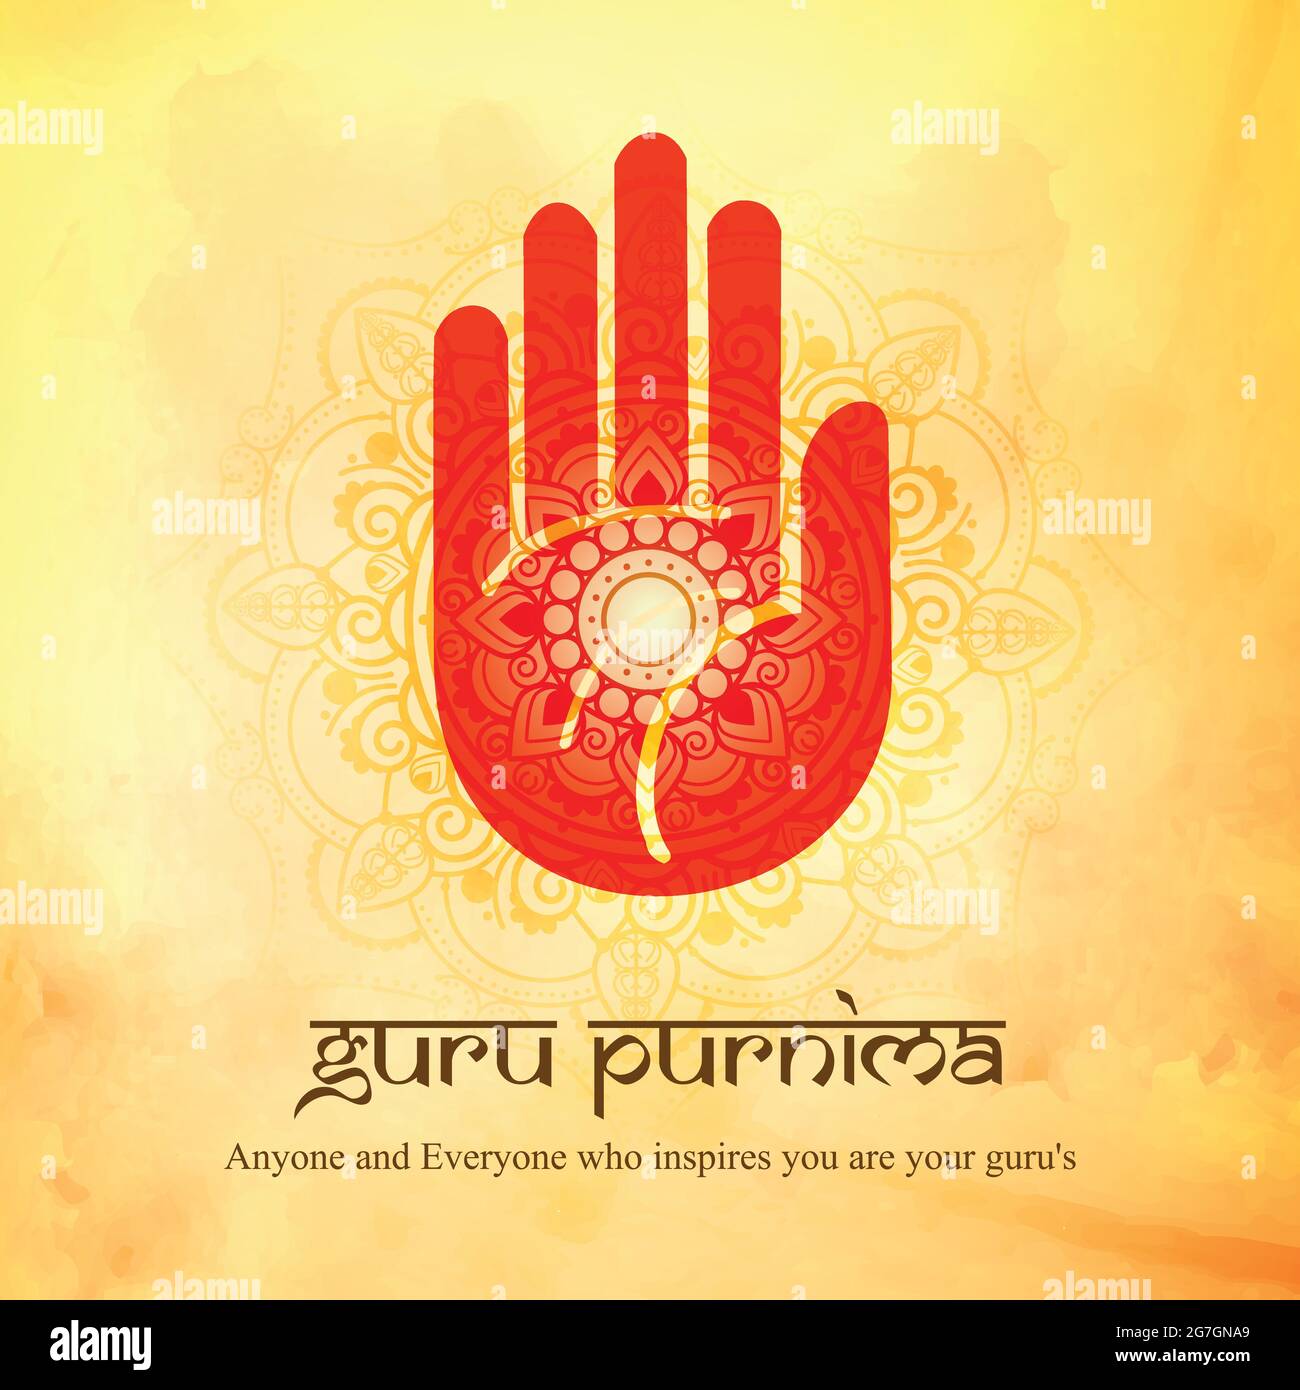 Illustration of Guru Purnima with blessing hand which is decorated with mandala. Background of poster is also decorated with mandala in orange color. Stock Vector